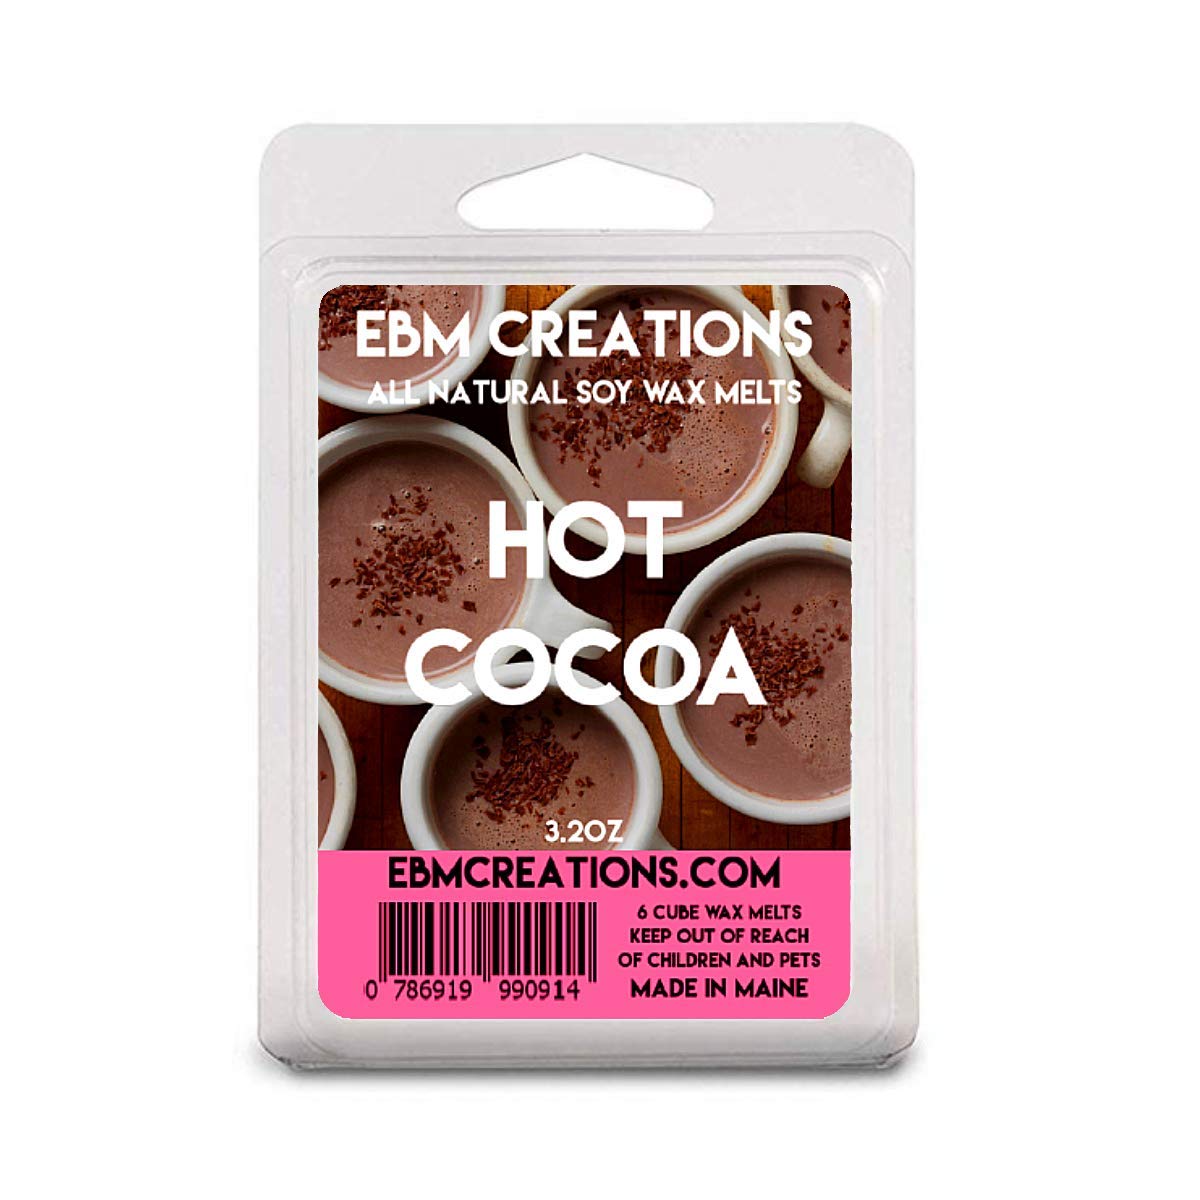 Hot Cocoa - 3.2 oz Clamshell